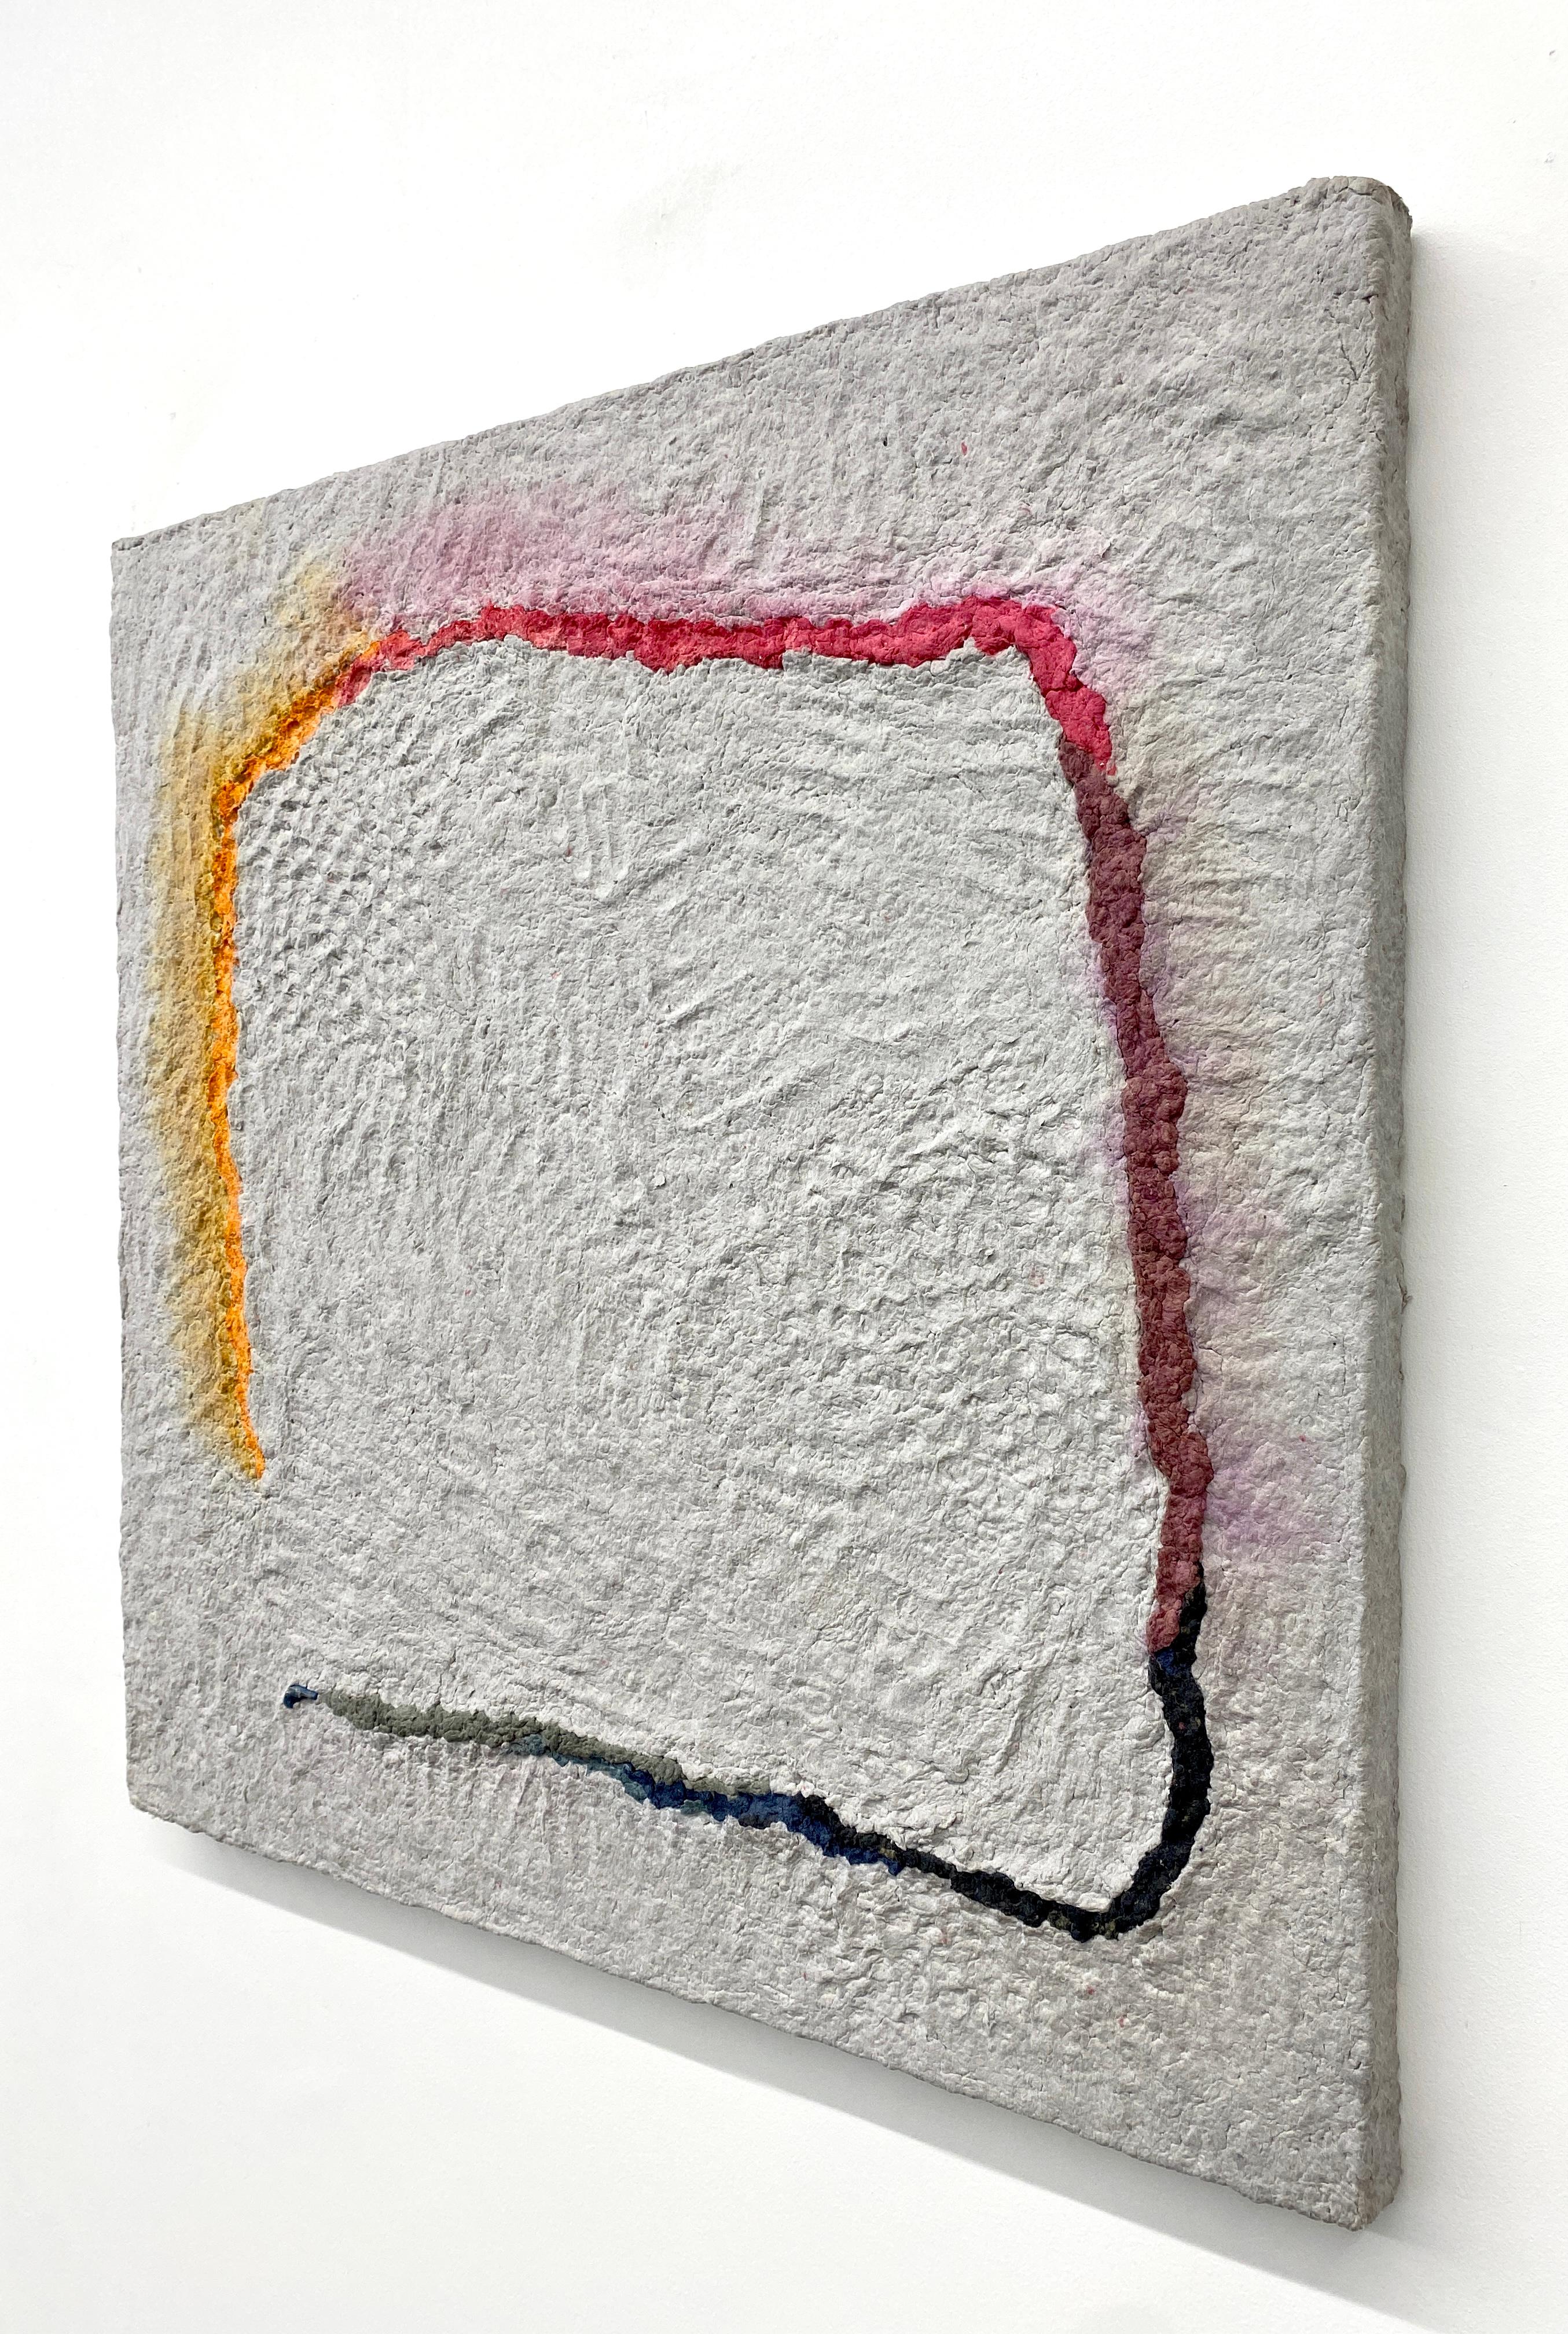 Rainbow Snake, Contemporary Pulped Clothing Painting, Abstract, Minimalism - Contemporain Sculpture par Jenn Hassin